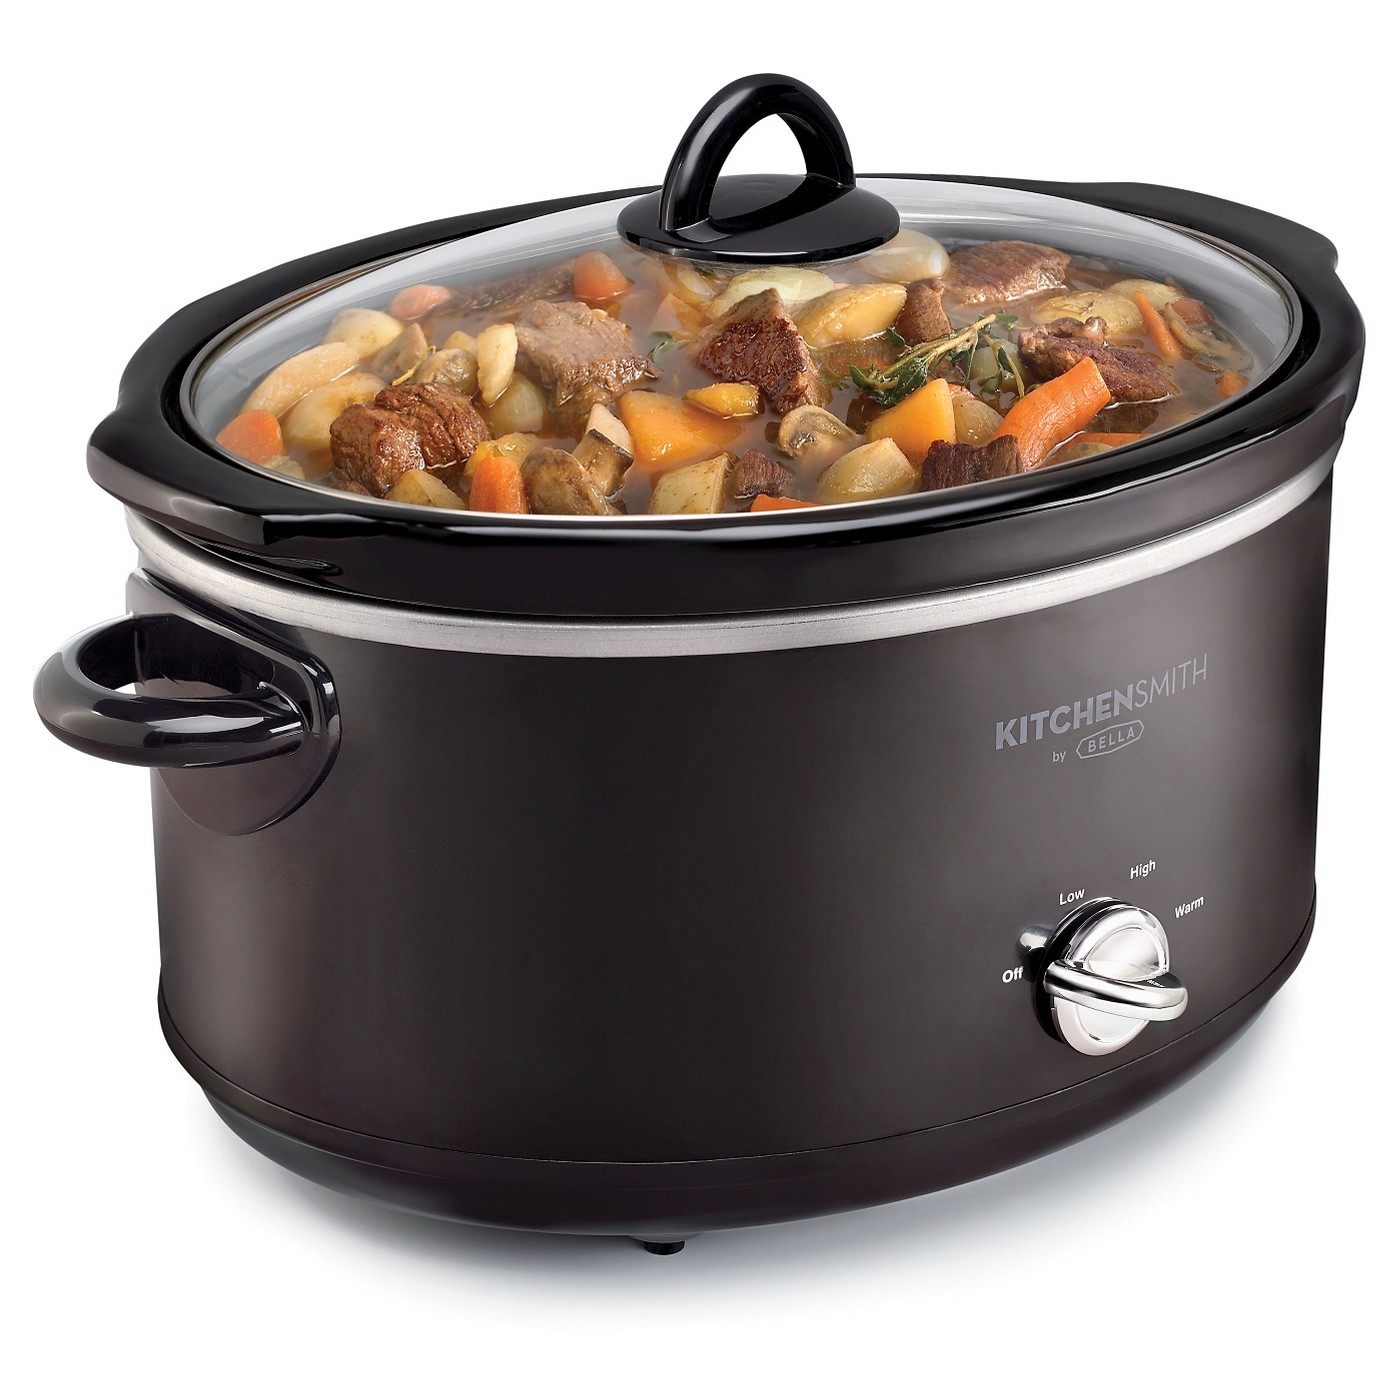 KitchenSmith by Bella 6-quart manual slow cooker for $12